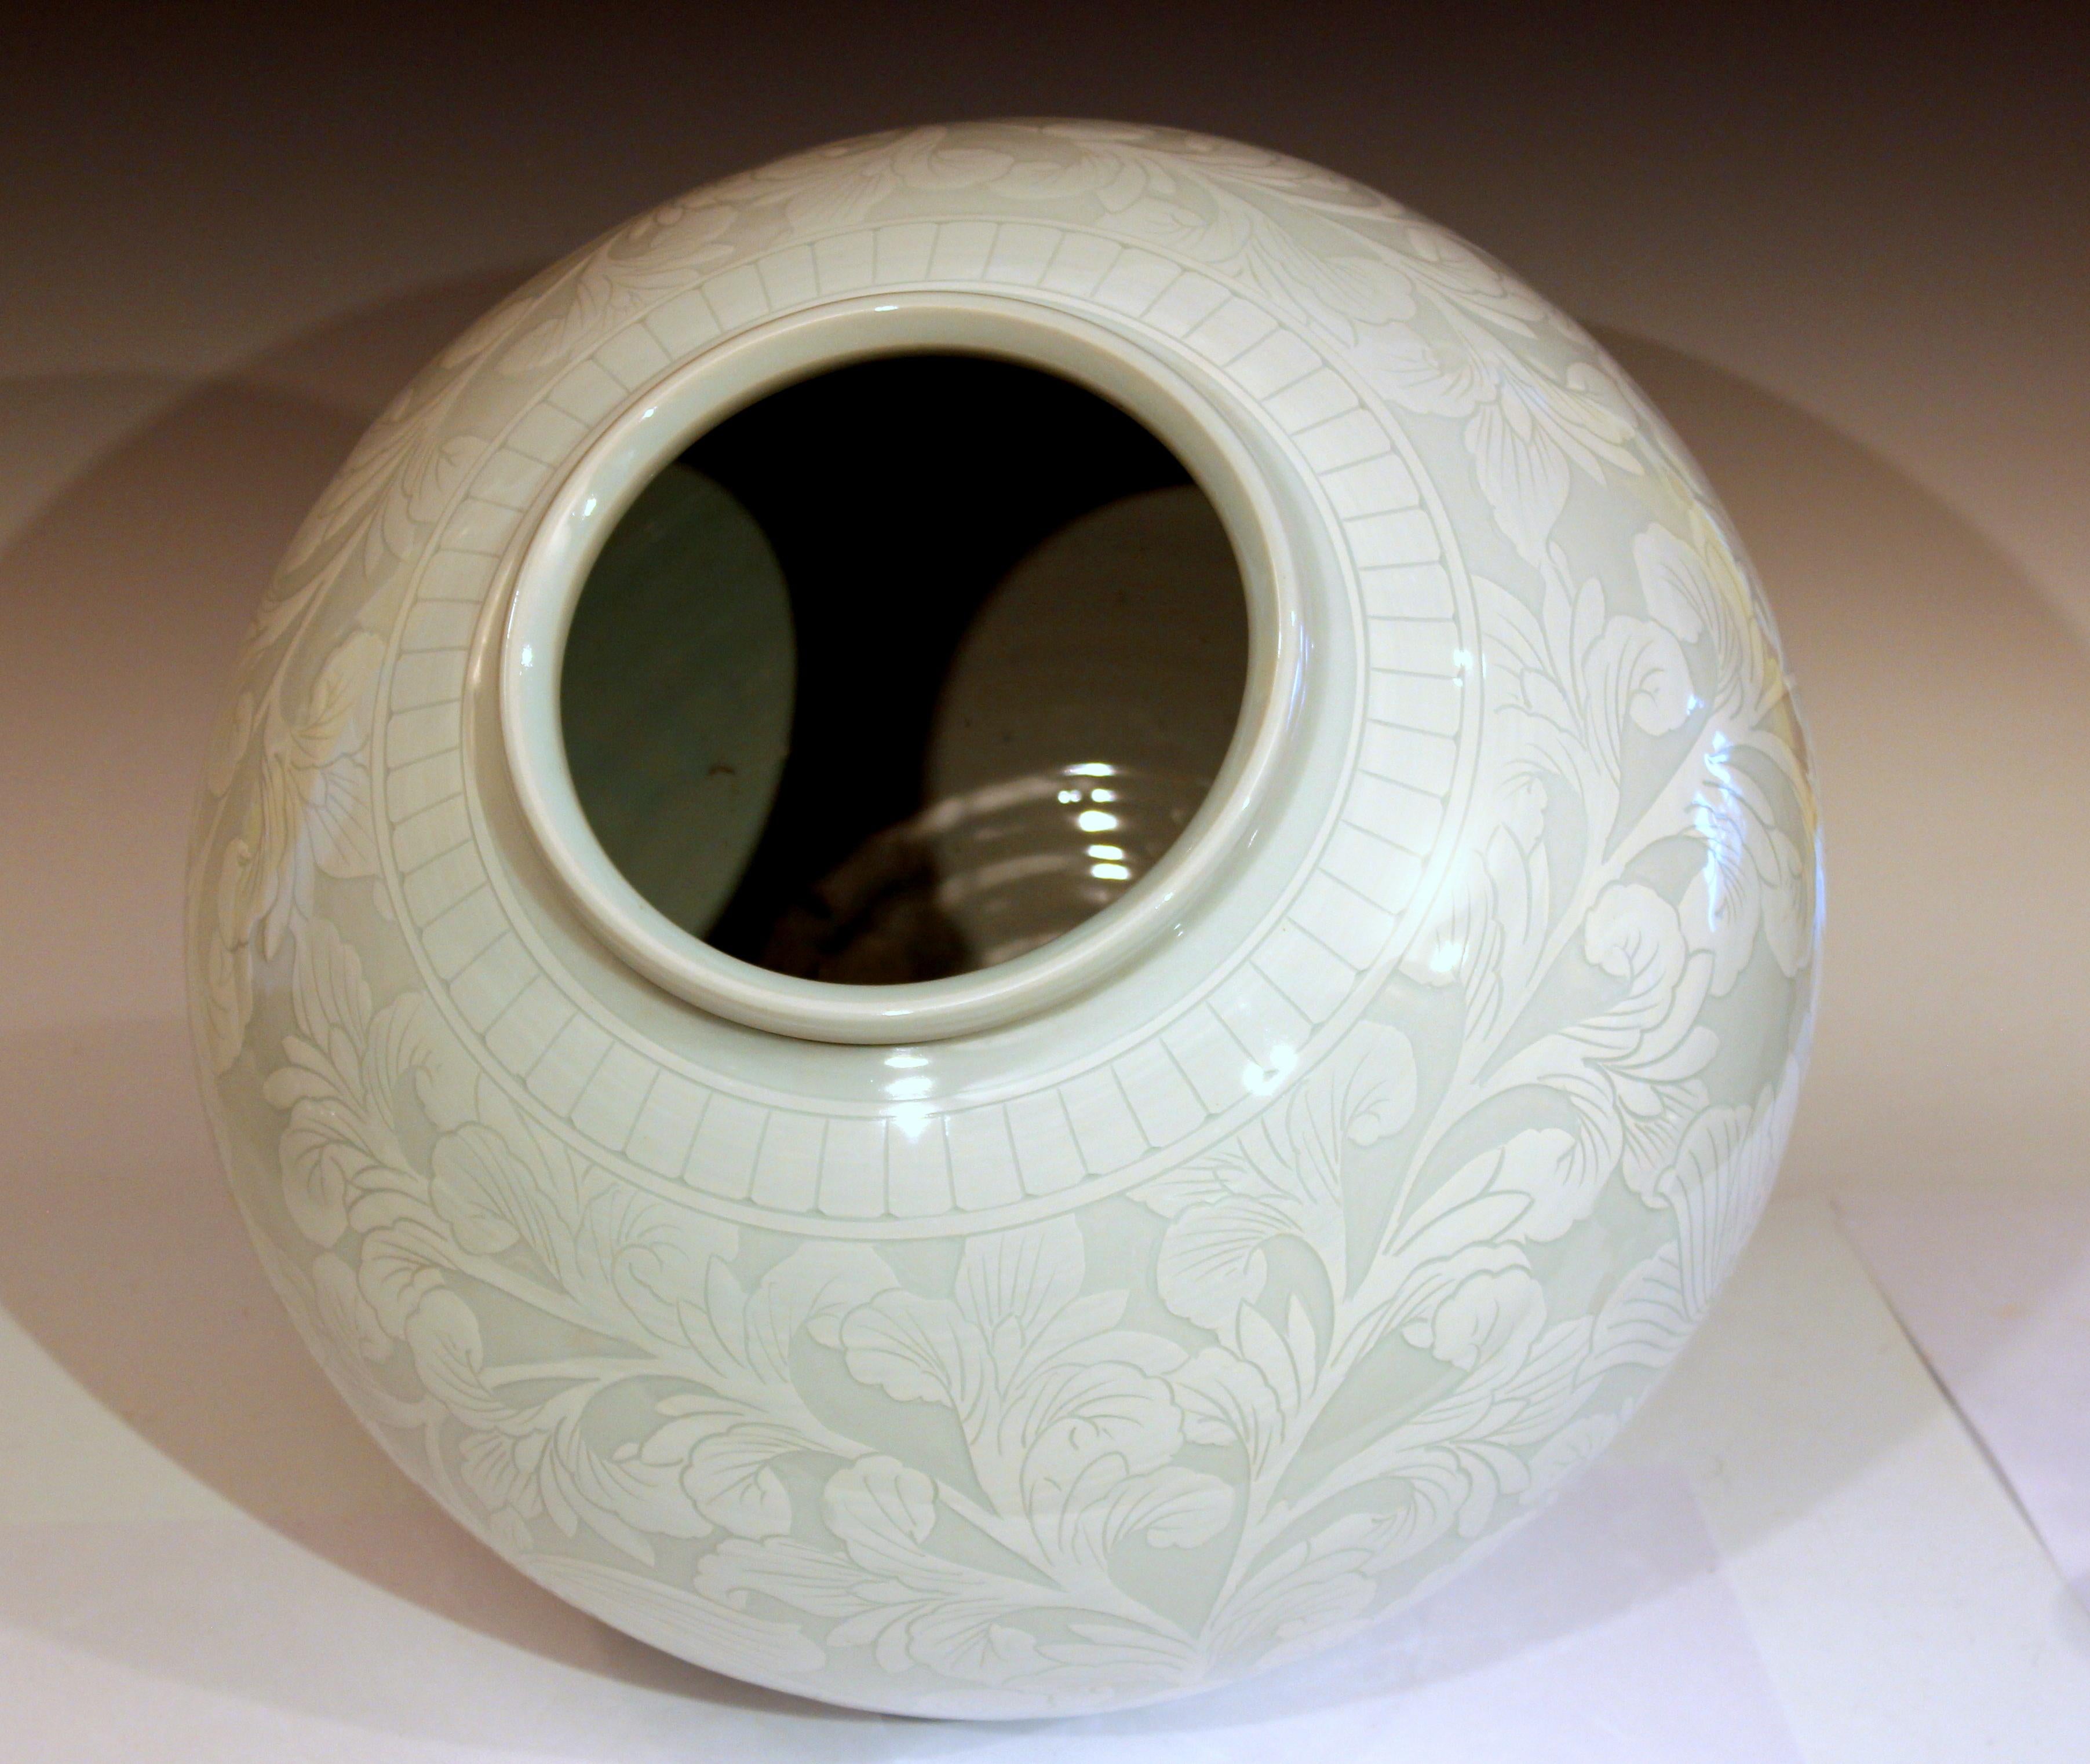 Large Korean studio porcelain moon vase with carved slipware design of a peony scroll. hand-turned and hand decorated. Exceptional design flawlessly executed. Modern. Signed on base. 12” high, 14” diameter. Excellent condition.